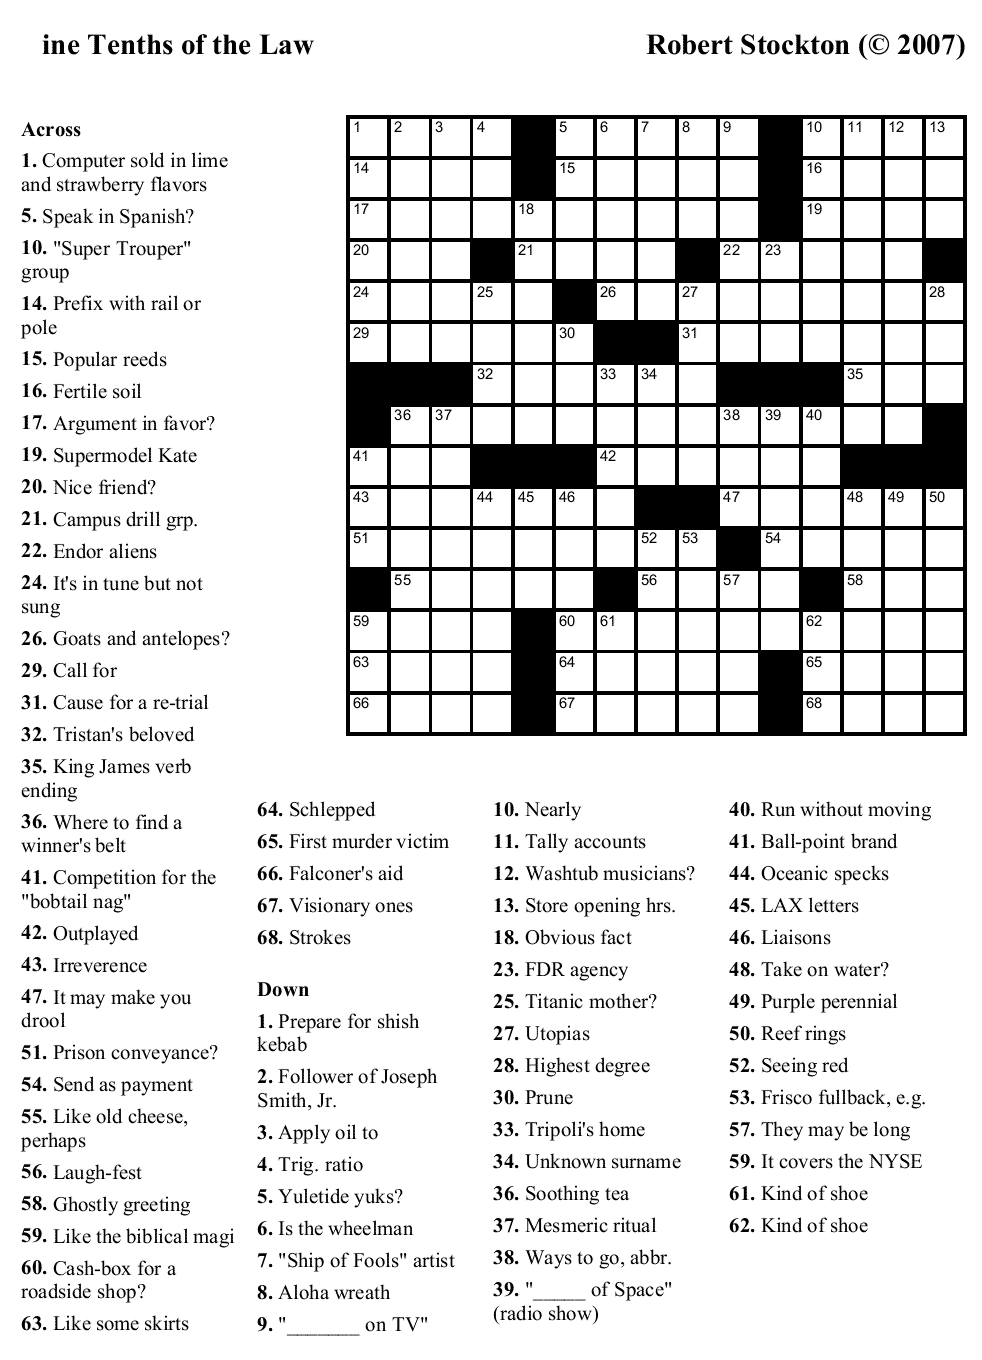 Crossword Puzzles Printable - Yahoo Image Search Results | Crossword - Printable Crossword Puzzle Solutions